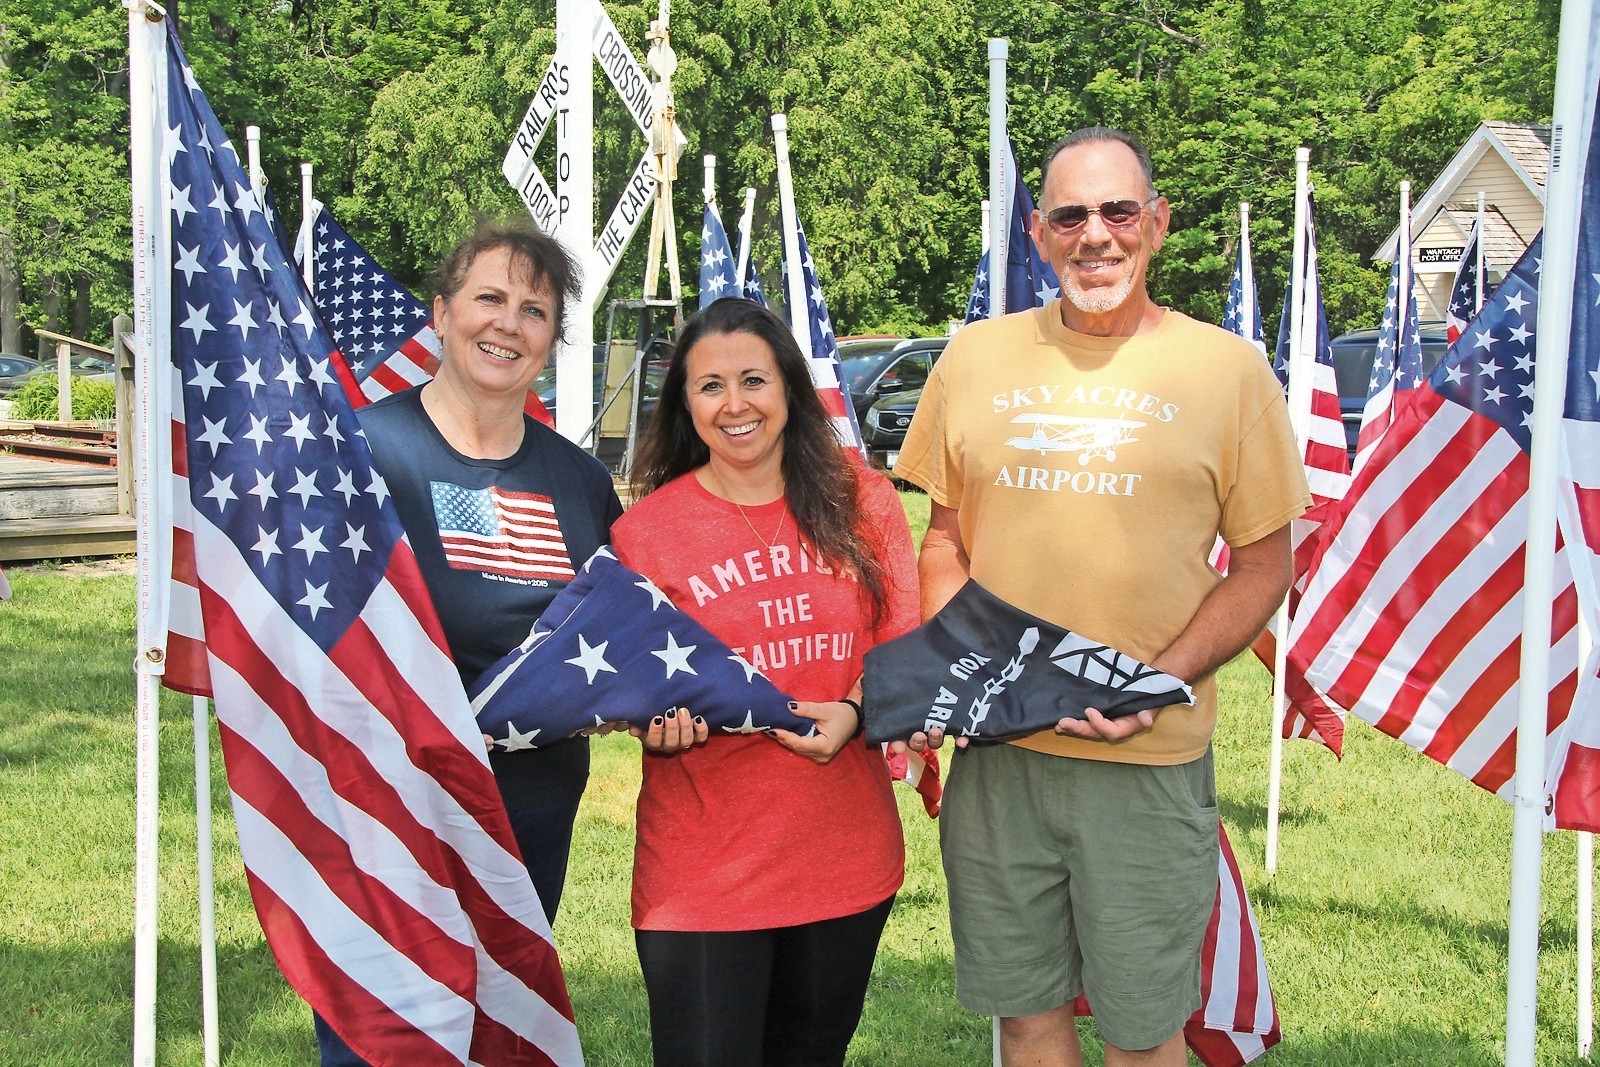 Wantagh 6-12 Association members Julie Argueta and Vivian Fitzgerald, along with Wantagh Historical Society Vice President Bob Meagher stood amongst the flags that now surround the Wantagh Museum.